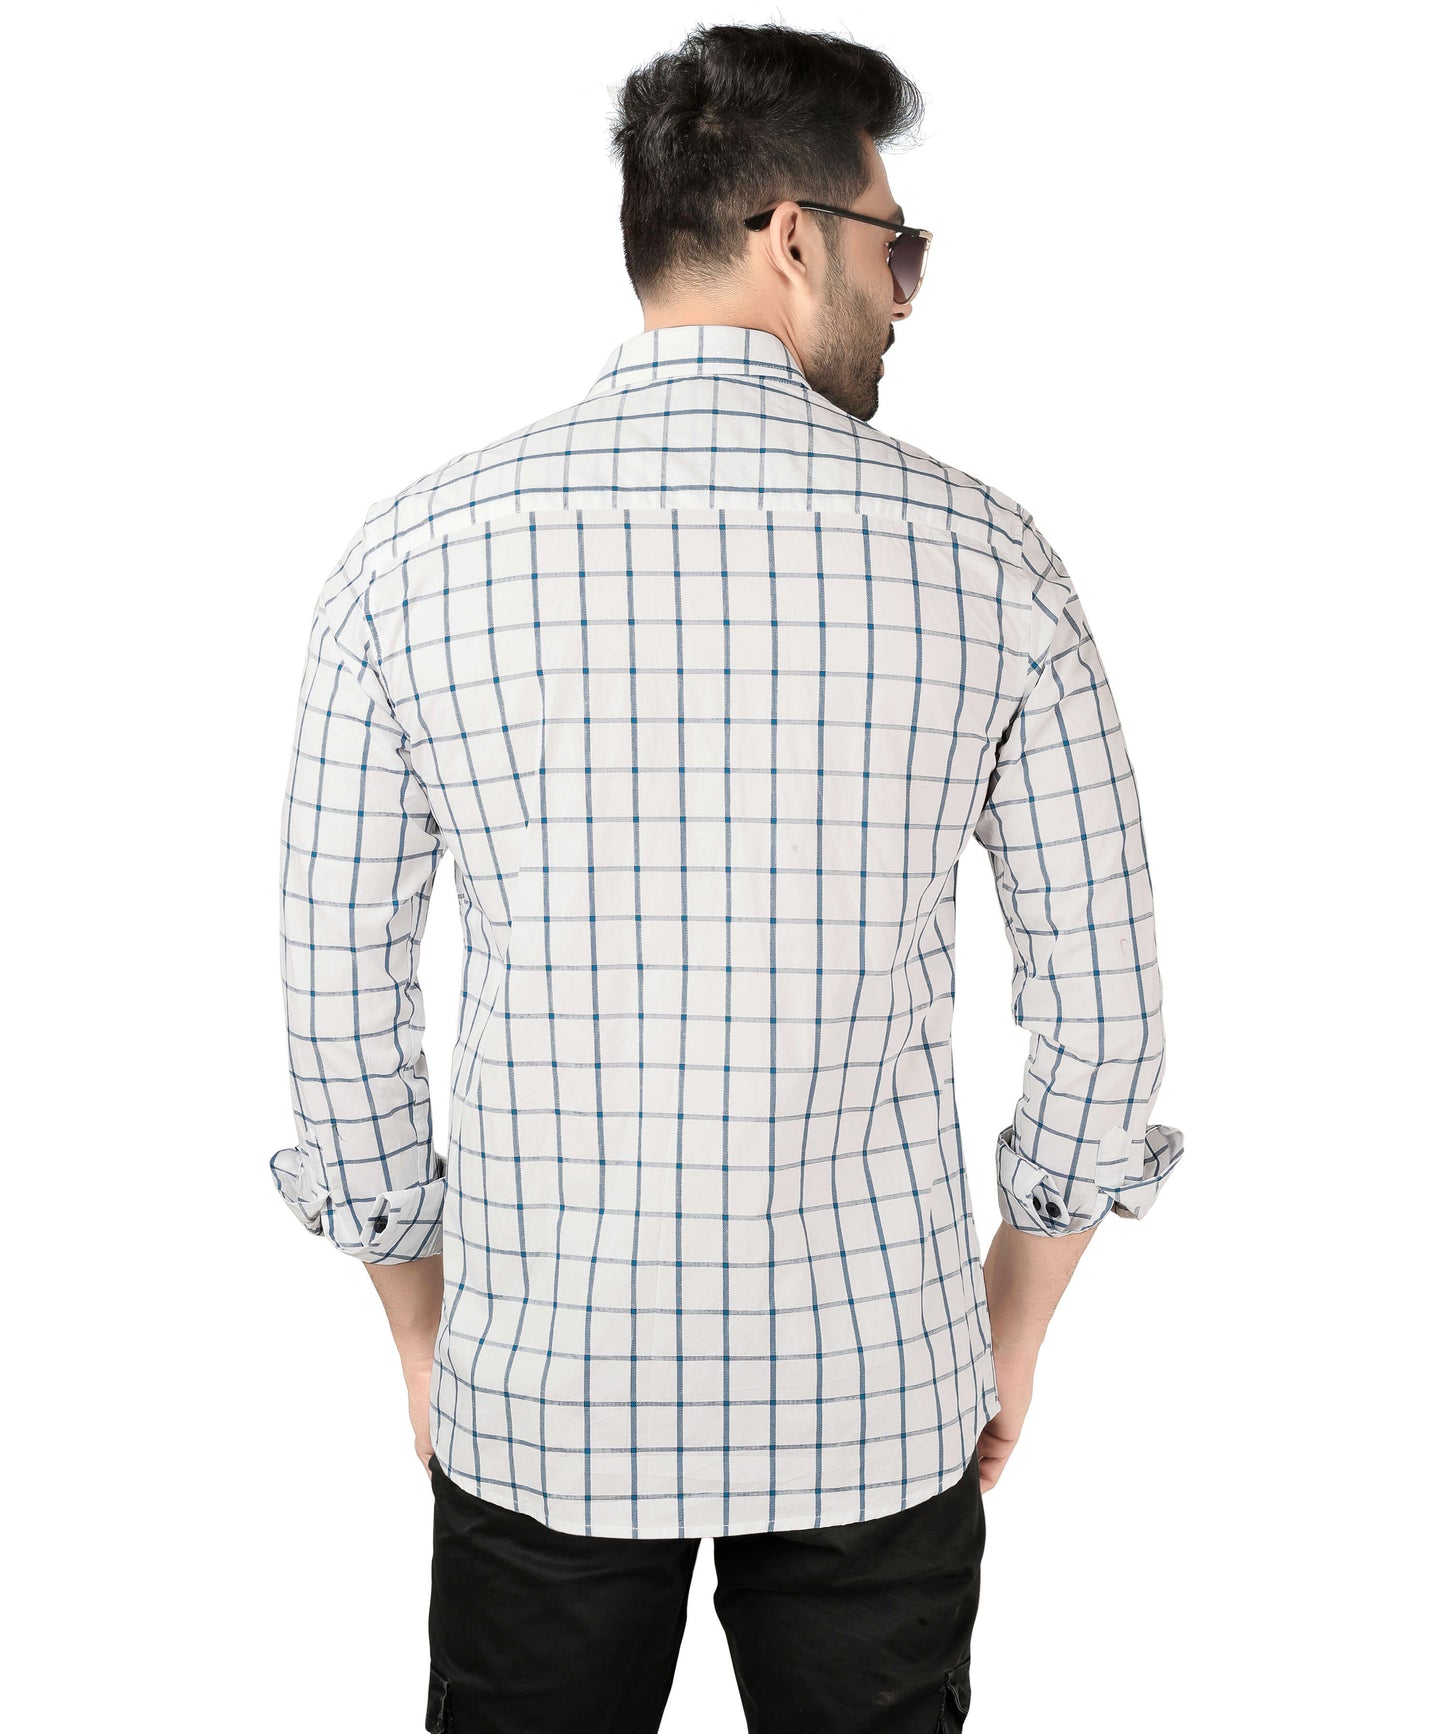 5thanfold Men's Casual Pure Cotton Full Sleeve Checkered White Regular Fit Shirt